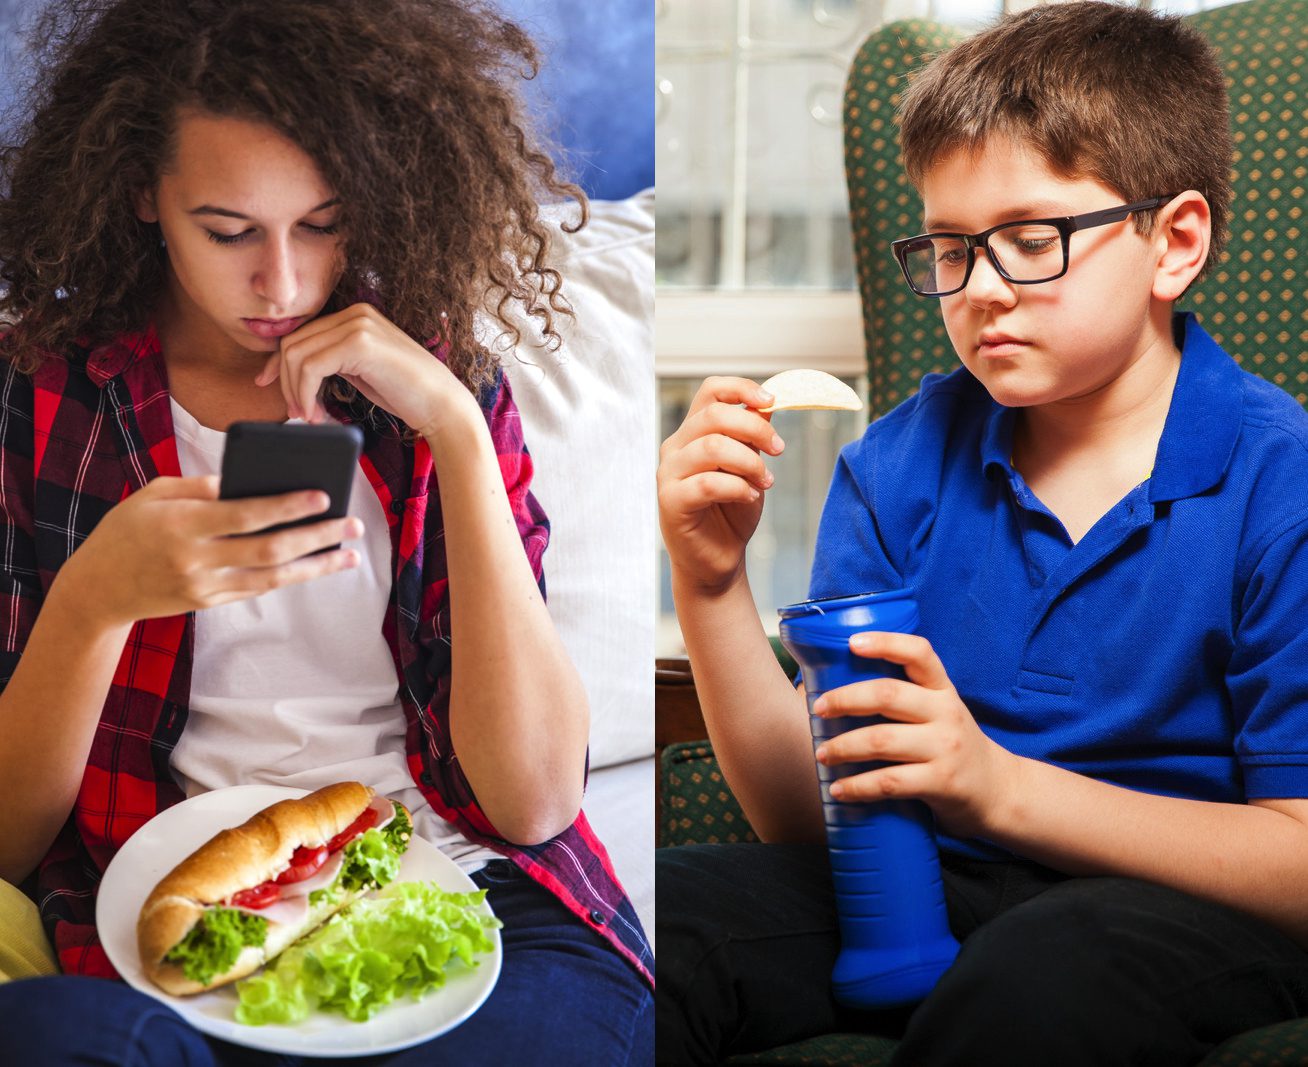 Split photo of girl using cell phone while eating big sandwich and boy holding potato chip and looking sad